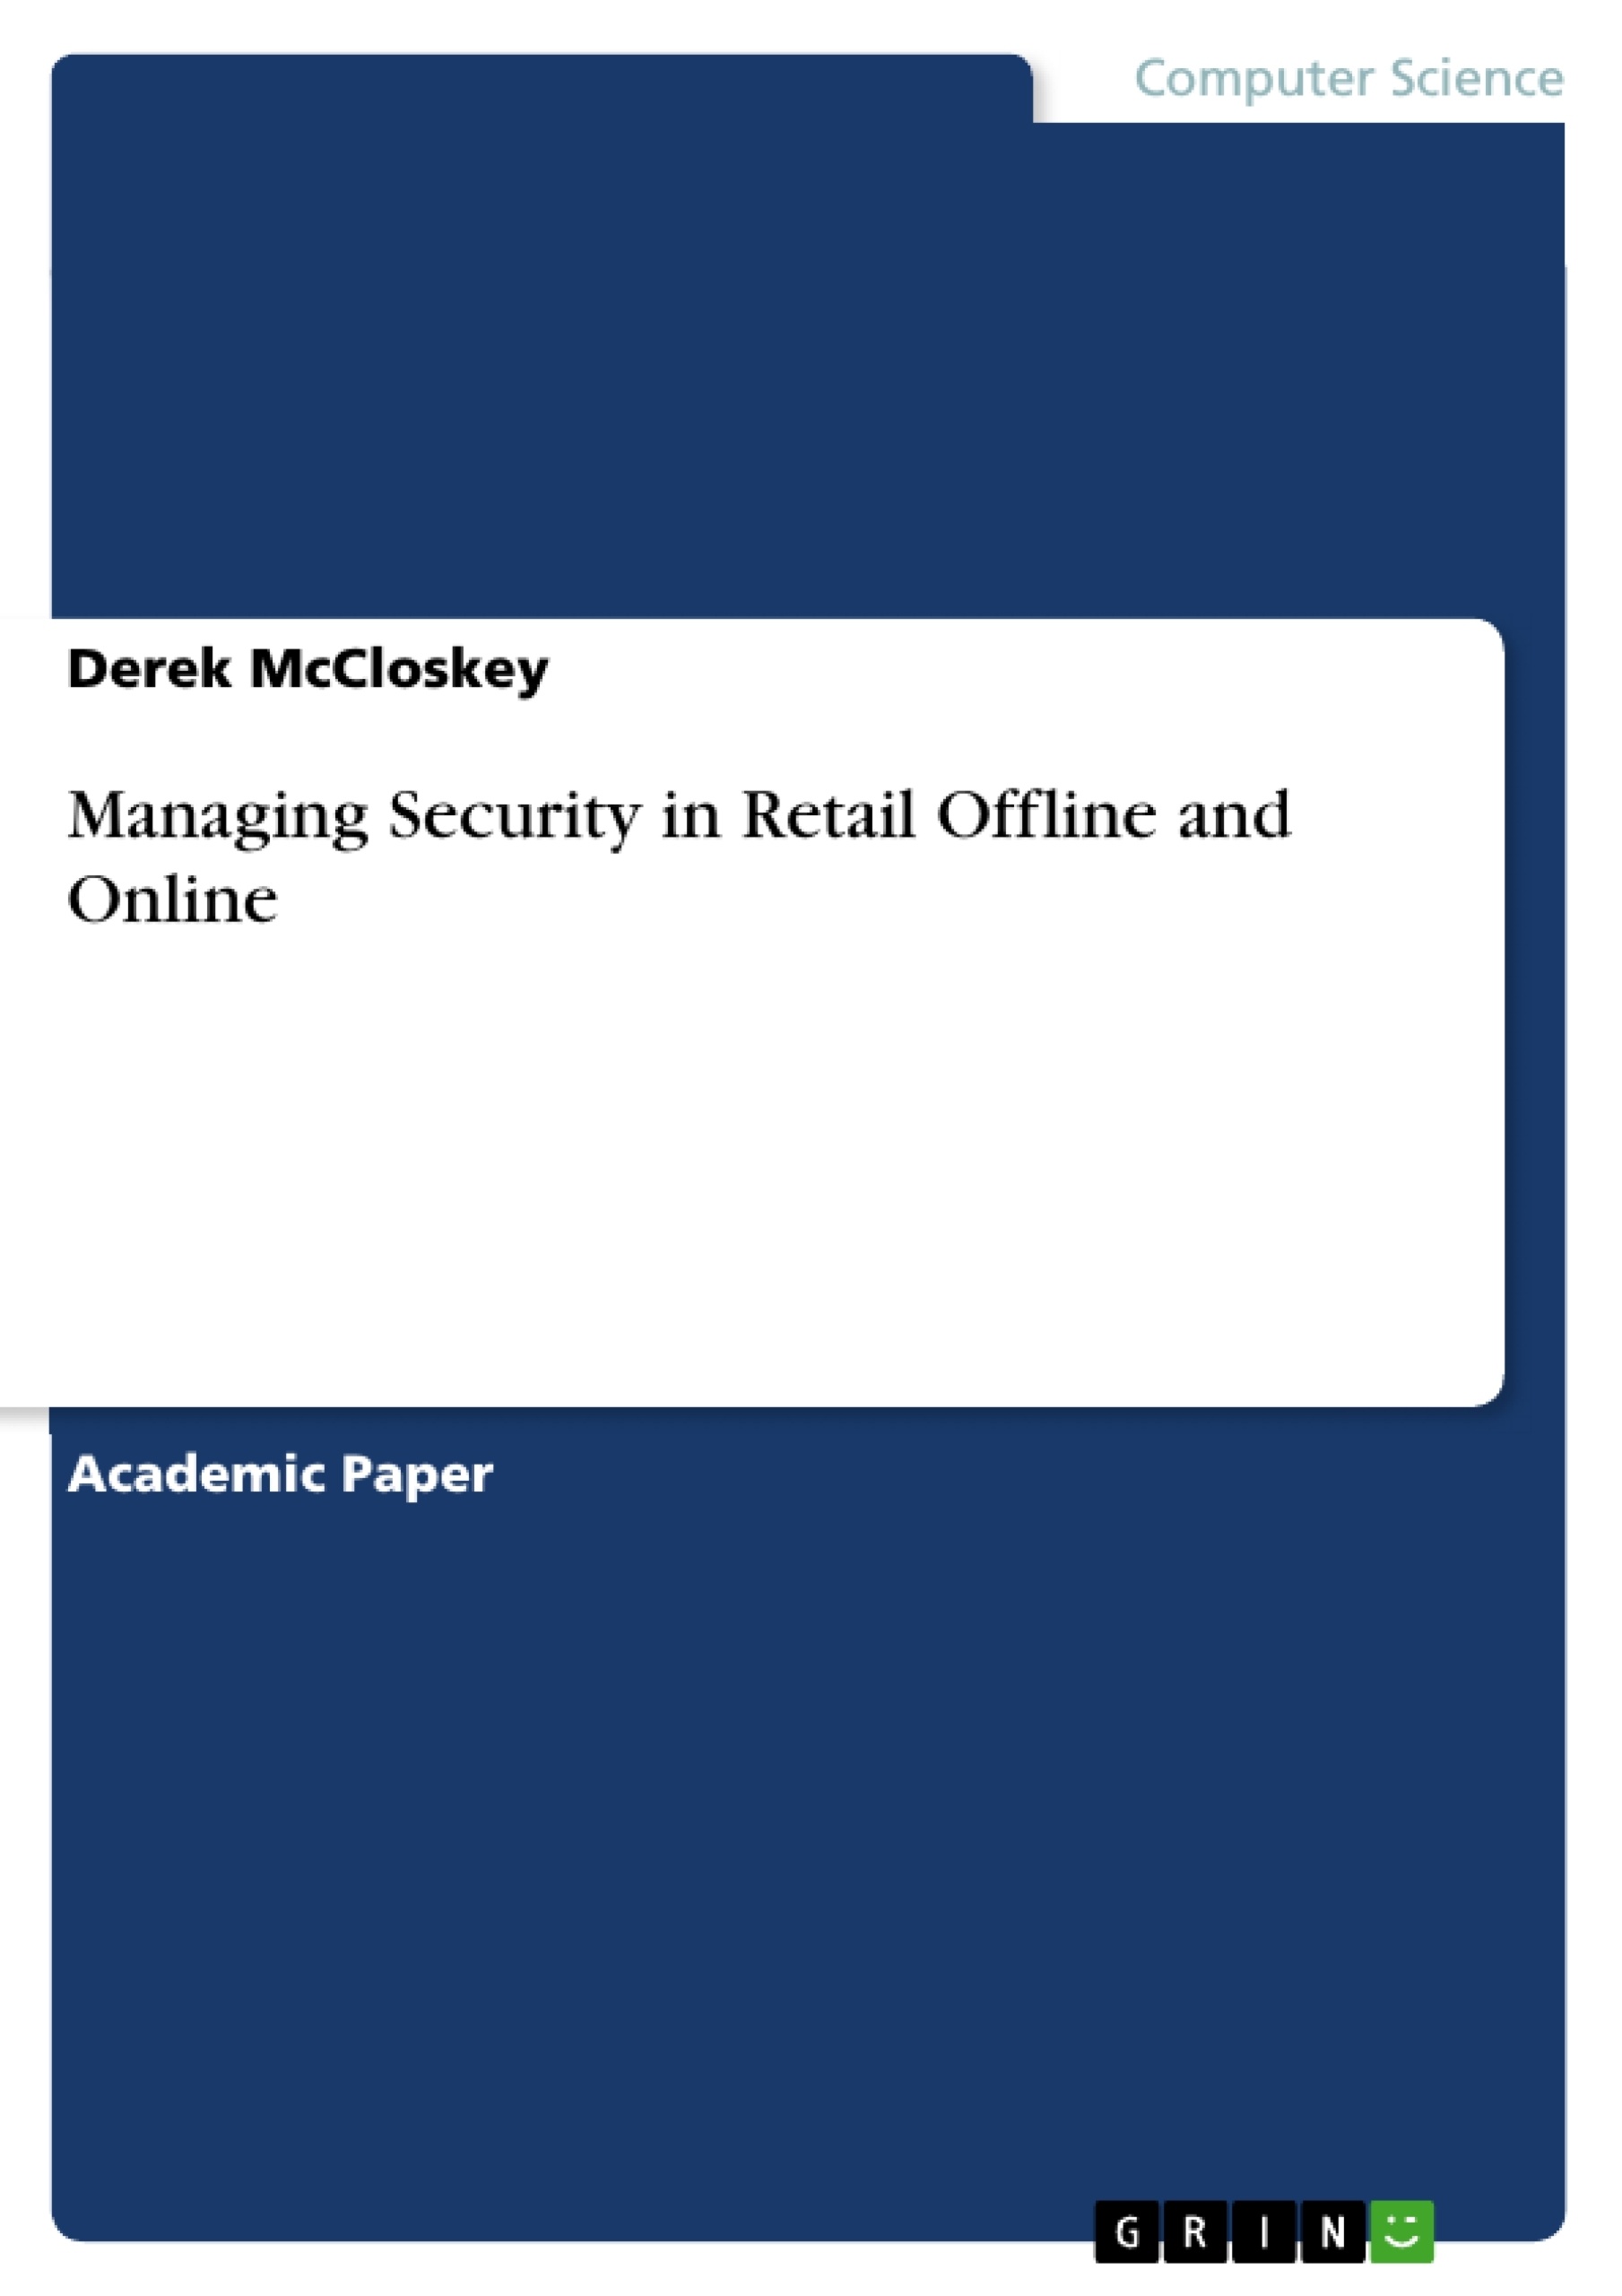 Title: Managing Security in Retail Offline and Online